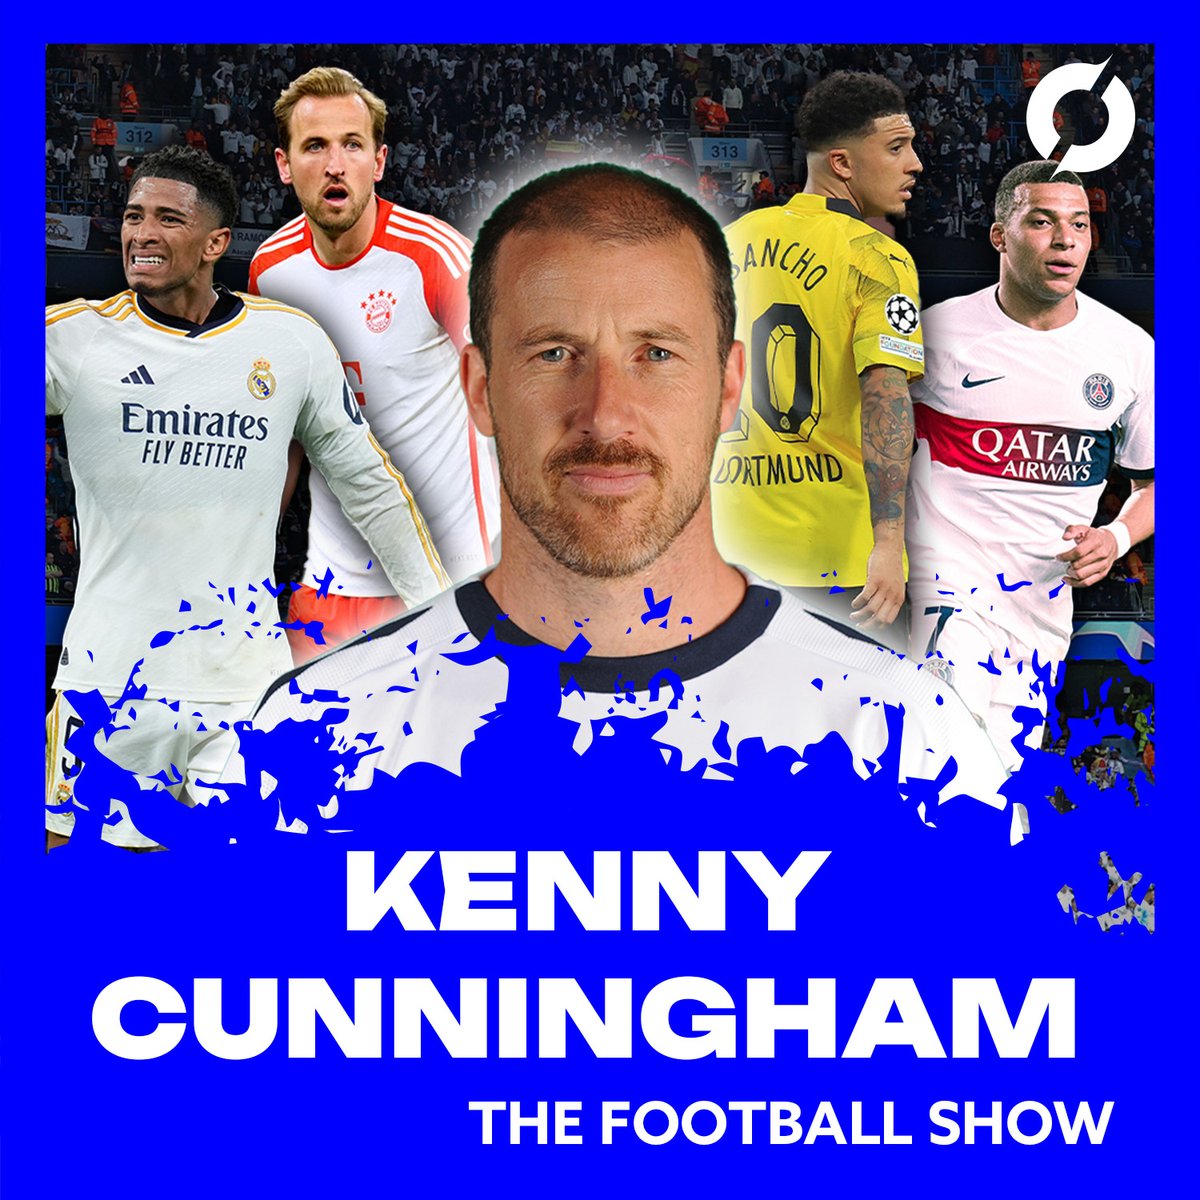 THE FOOTBALL SHOW W/ KENNY CUNNINGHAM ⚽ - Minute-by-minute reaction to Real Madrid v Bayern. 🏆 - LOI & Premier League chat. ☘️ Football on OTB, w/ @williamhillire. FULL POD HERE: goloudplayer.com/radio/off-the-…